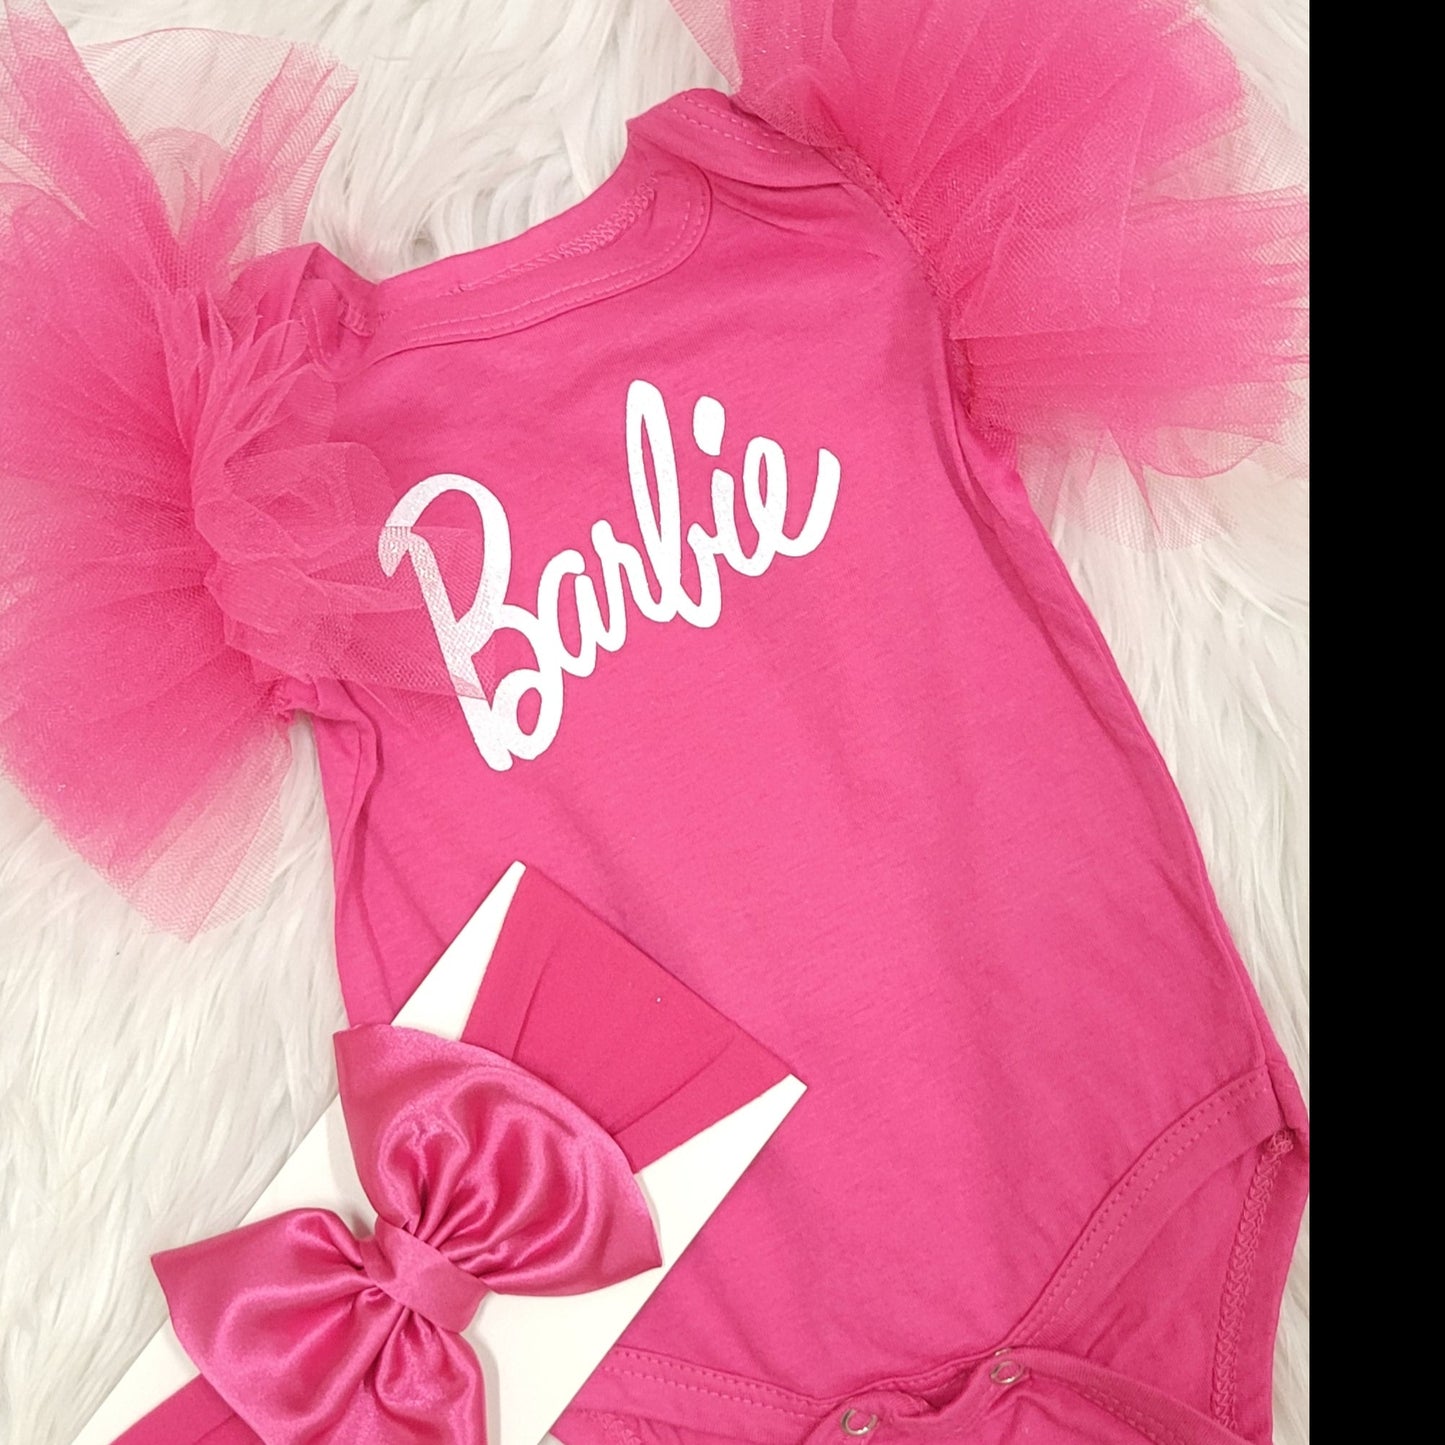 Barbie inspired, doll outfit, pink doll onesie